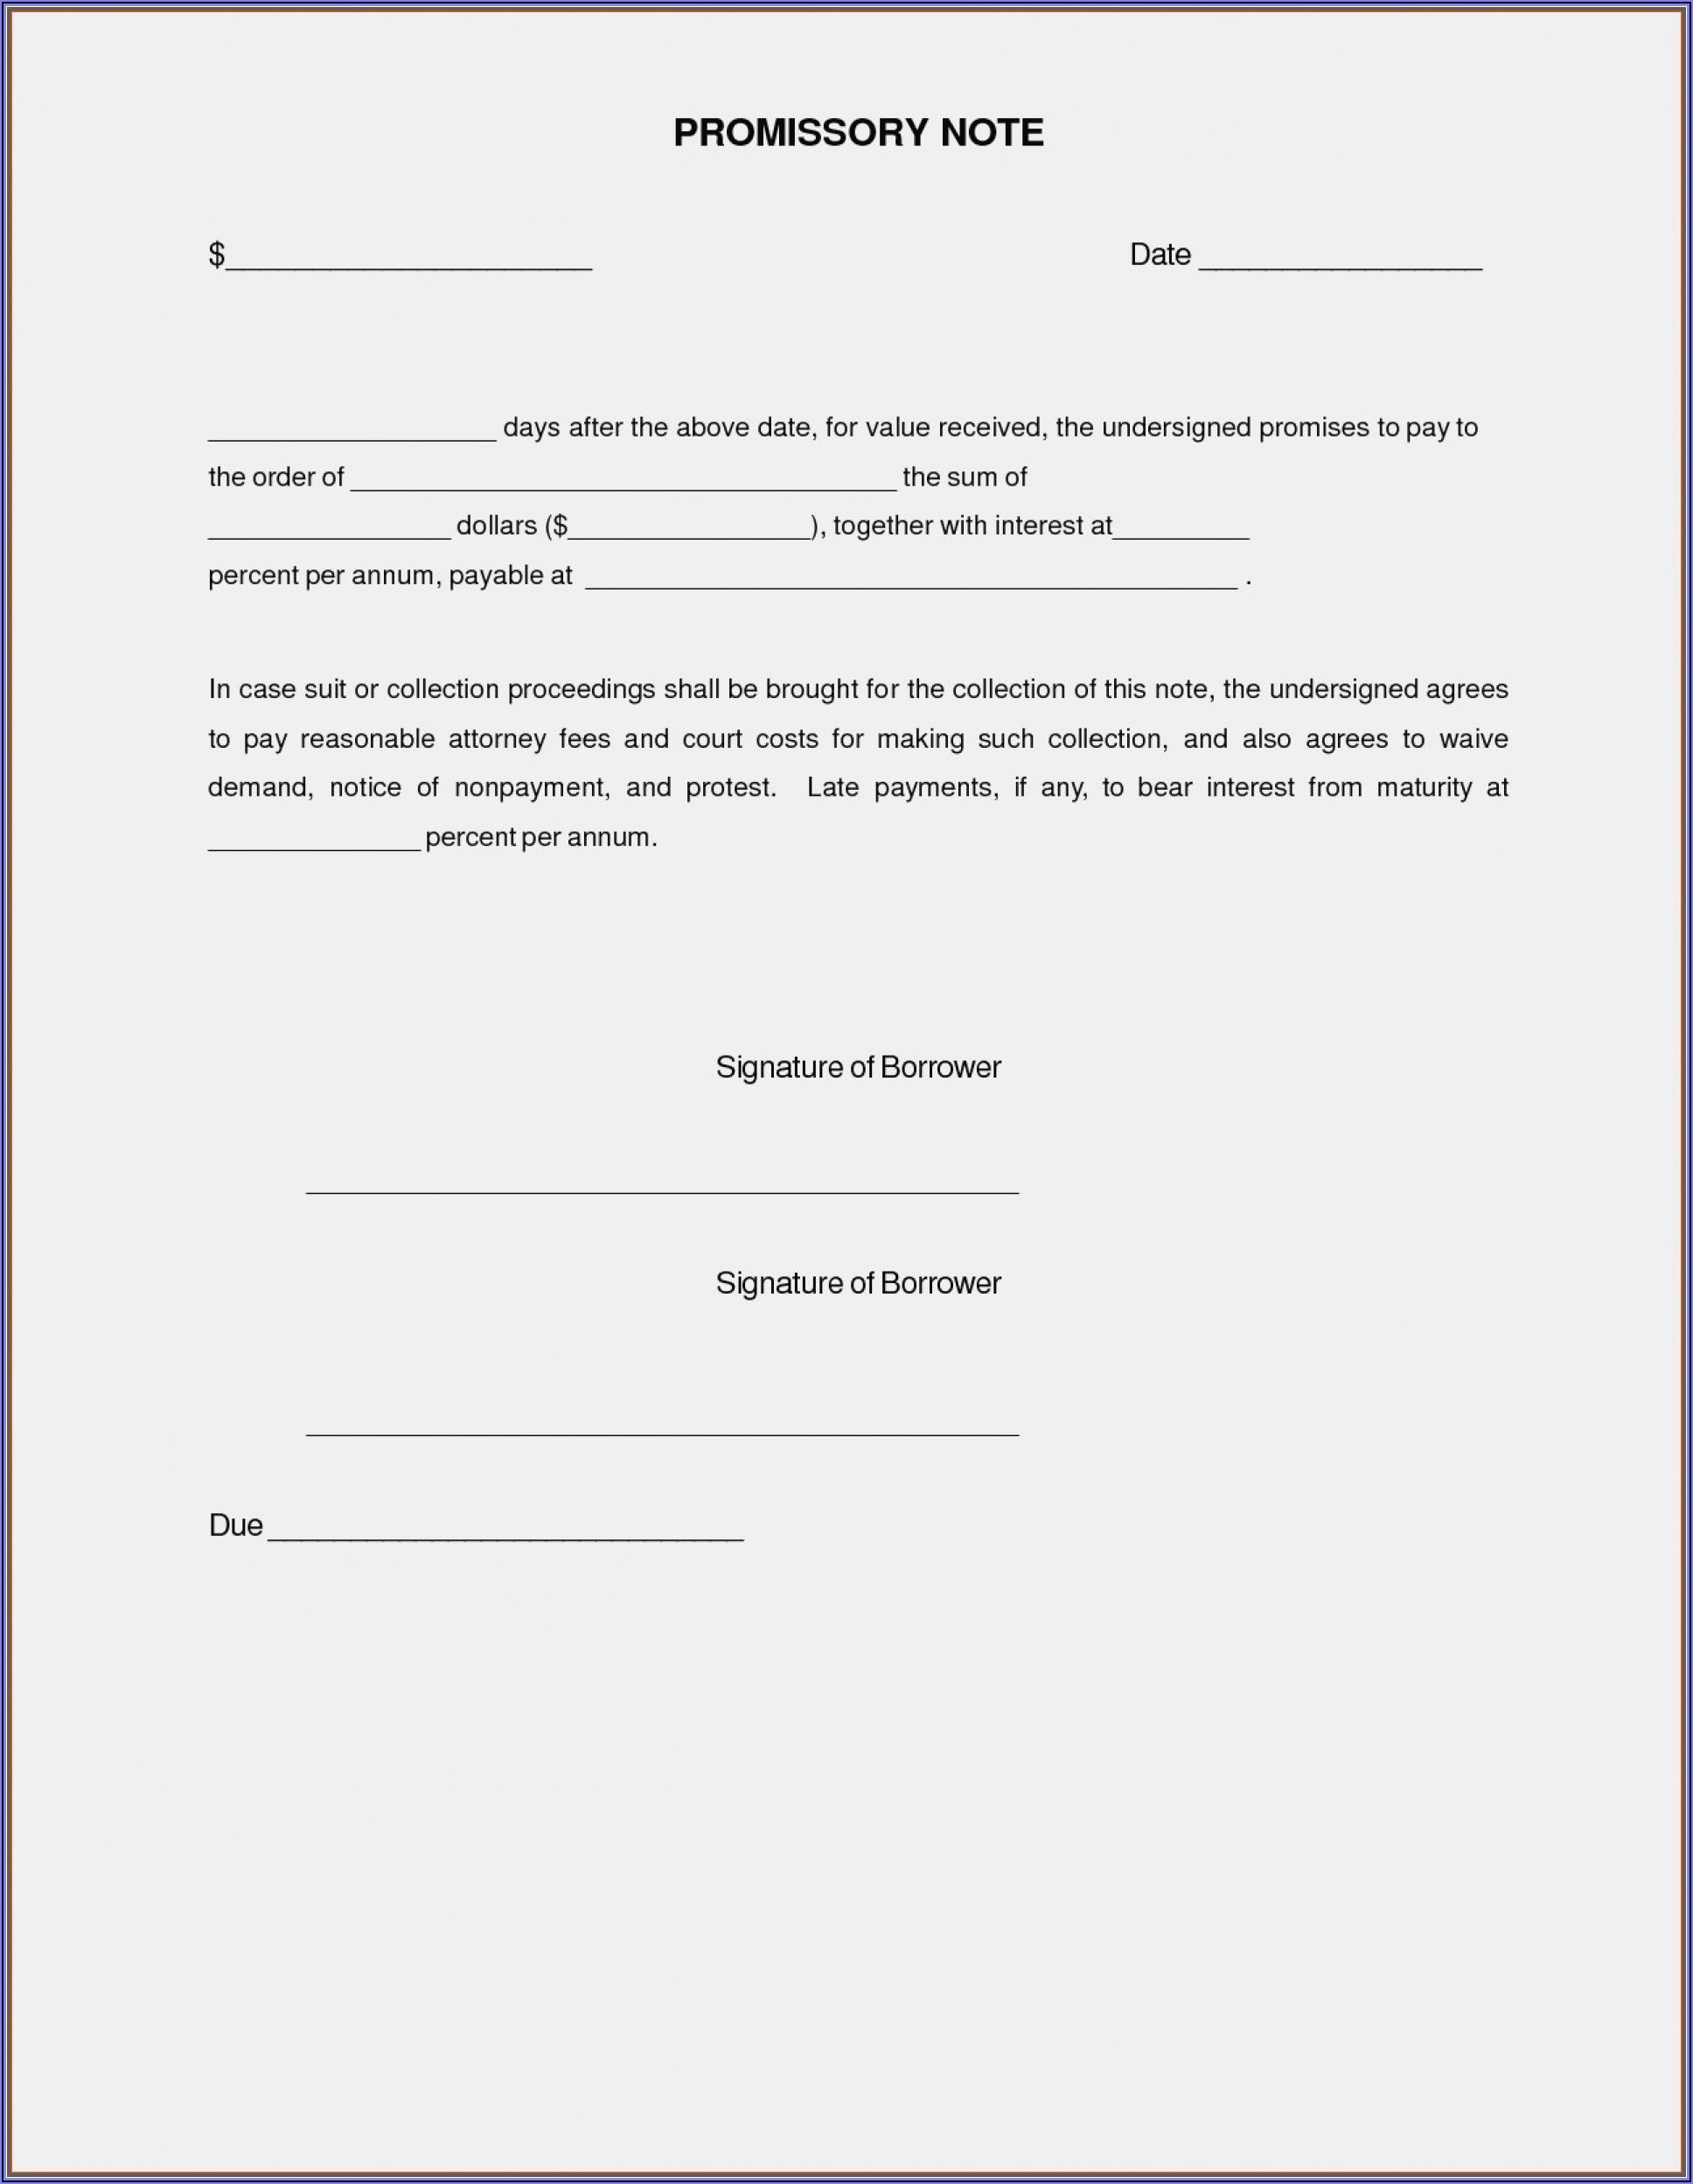 Promissory Note Template India